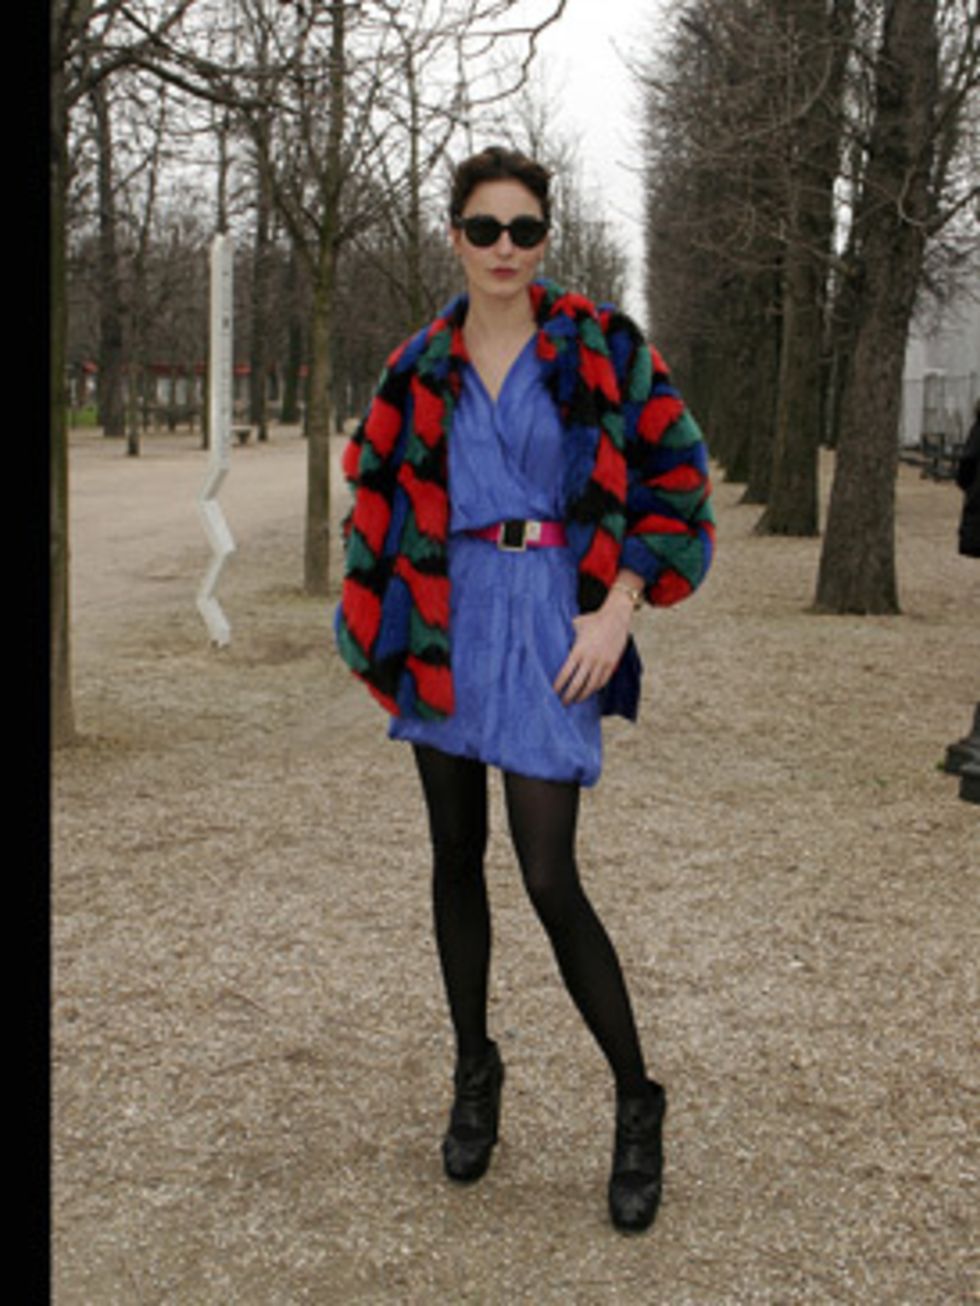 <p>This bold outfit is daring but works because the proportions are just right - she has teamed an oversize jacket with a mini dress to balance out the look.</p>